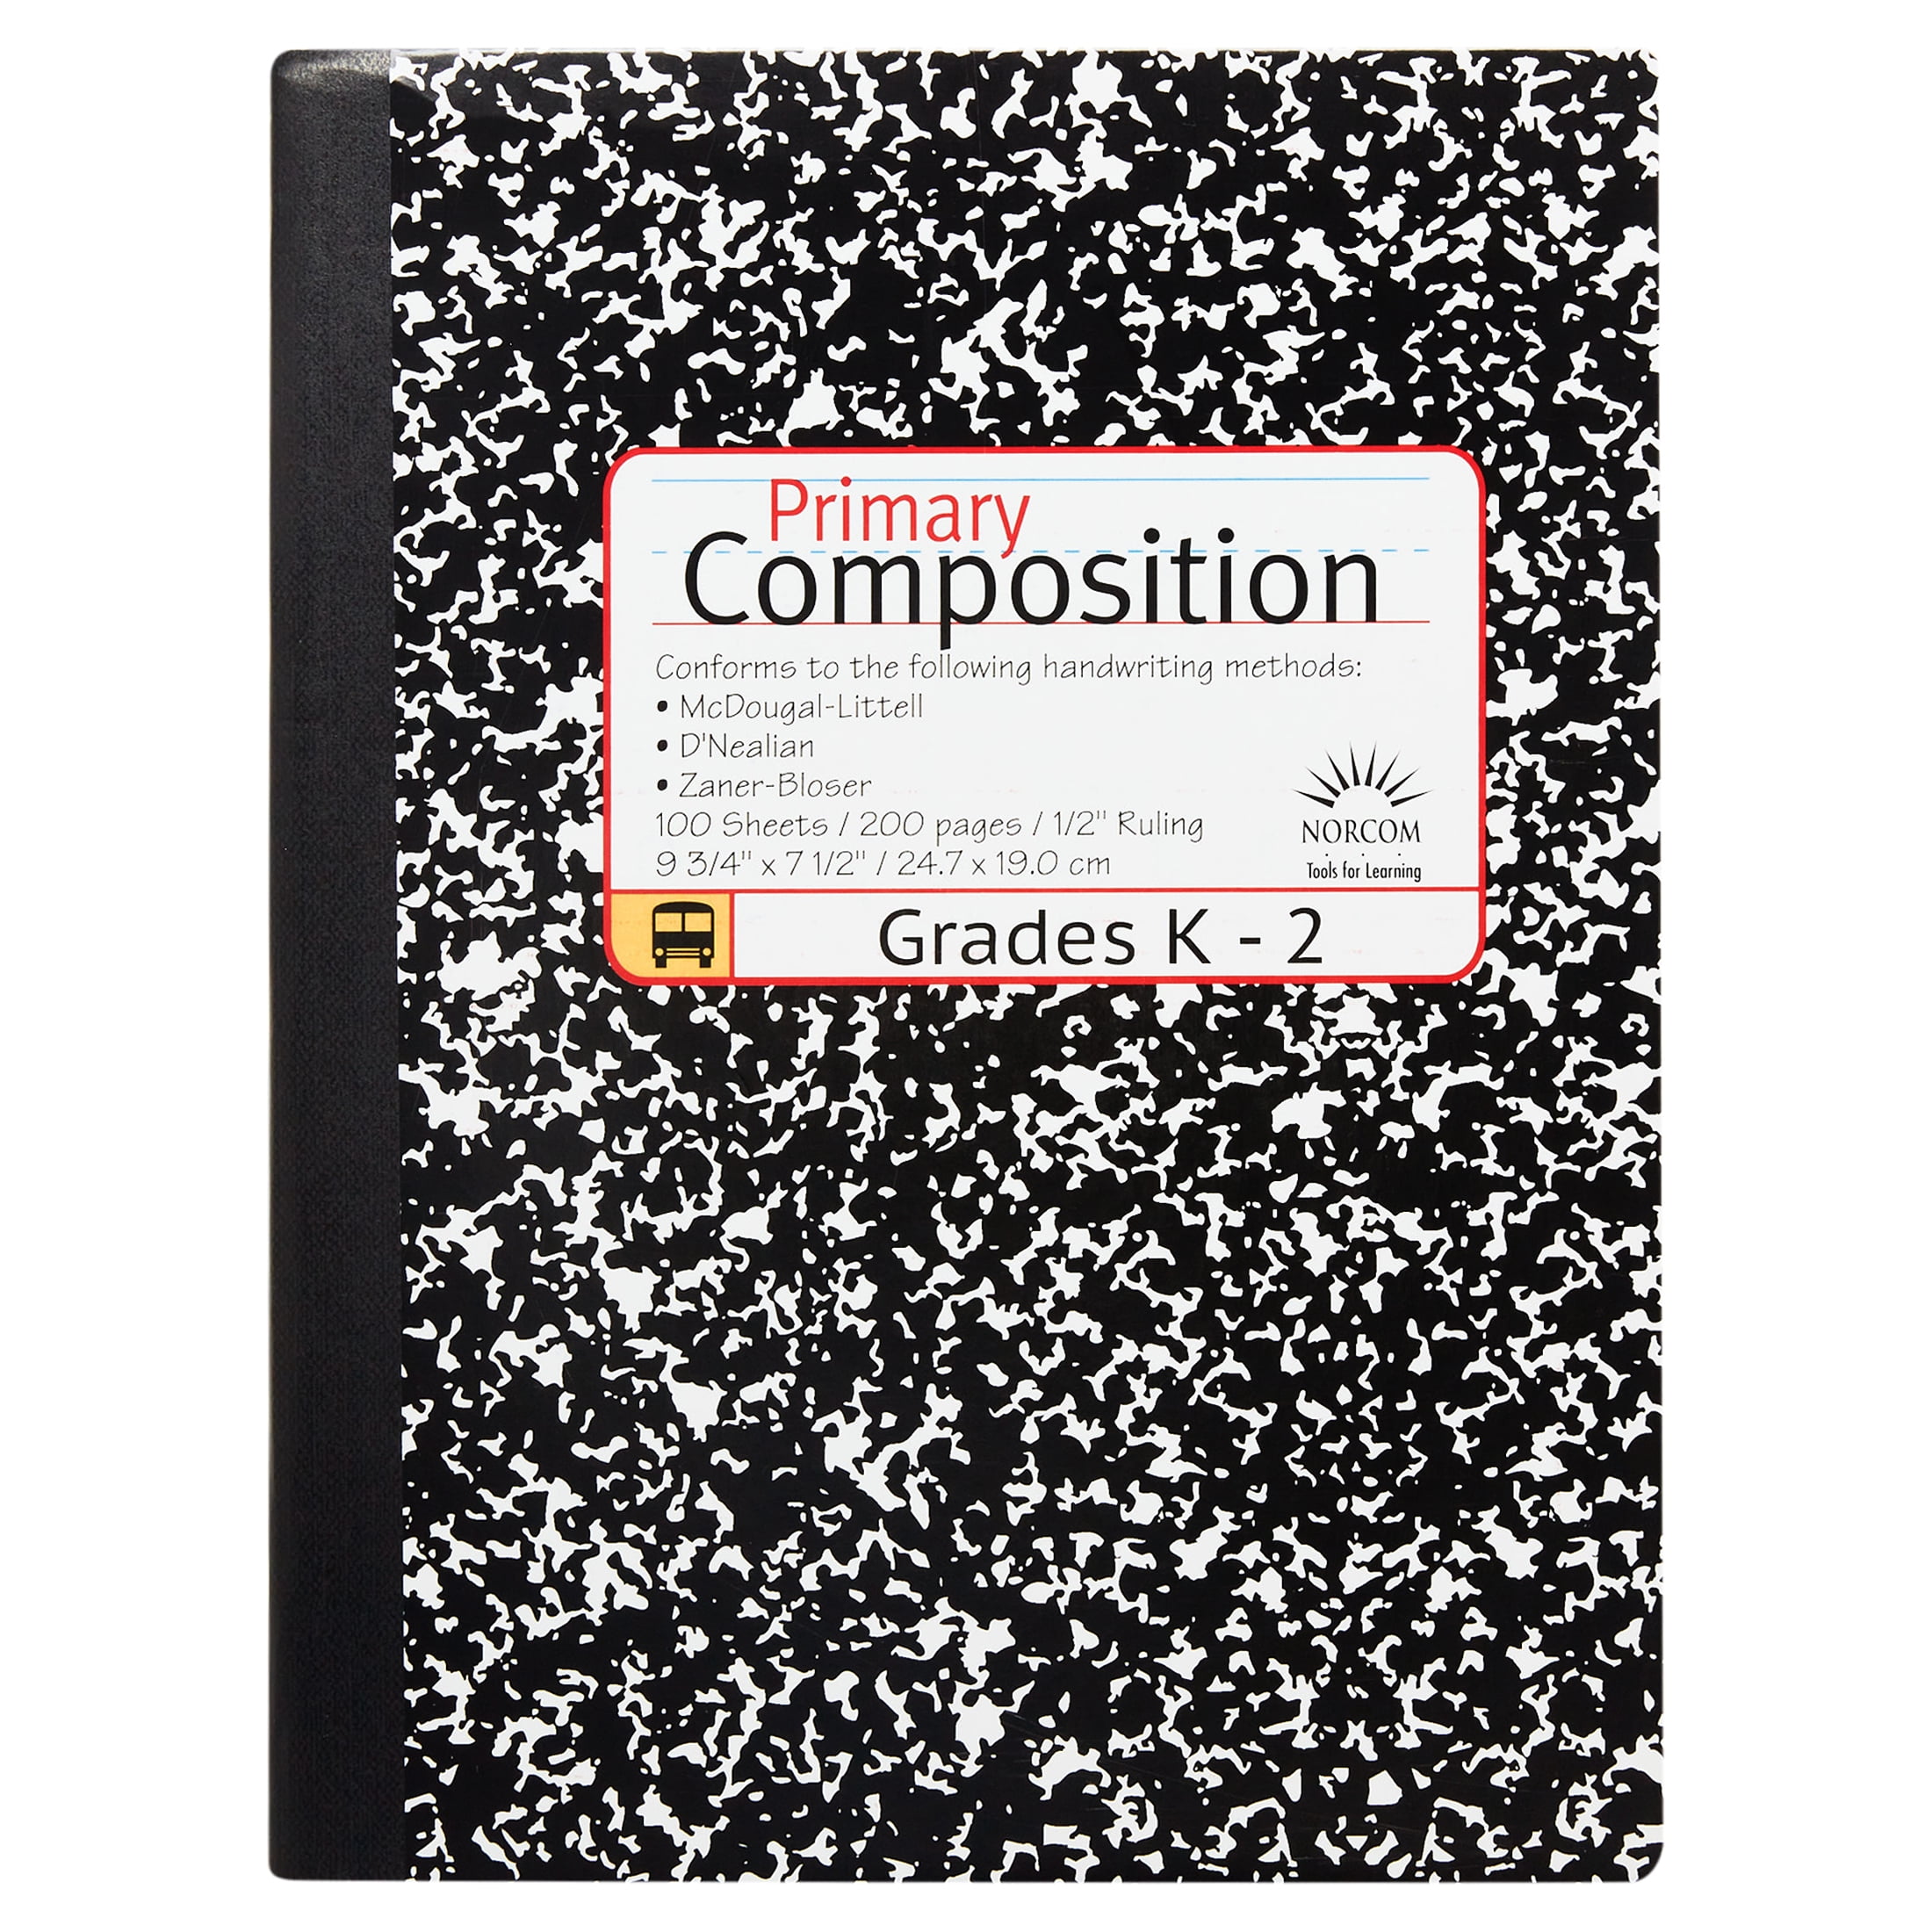 48 Bulk Composition Book Primary Journal 100 Ct. Grey - at 